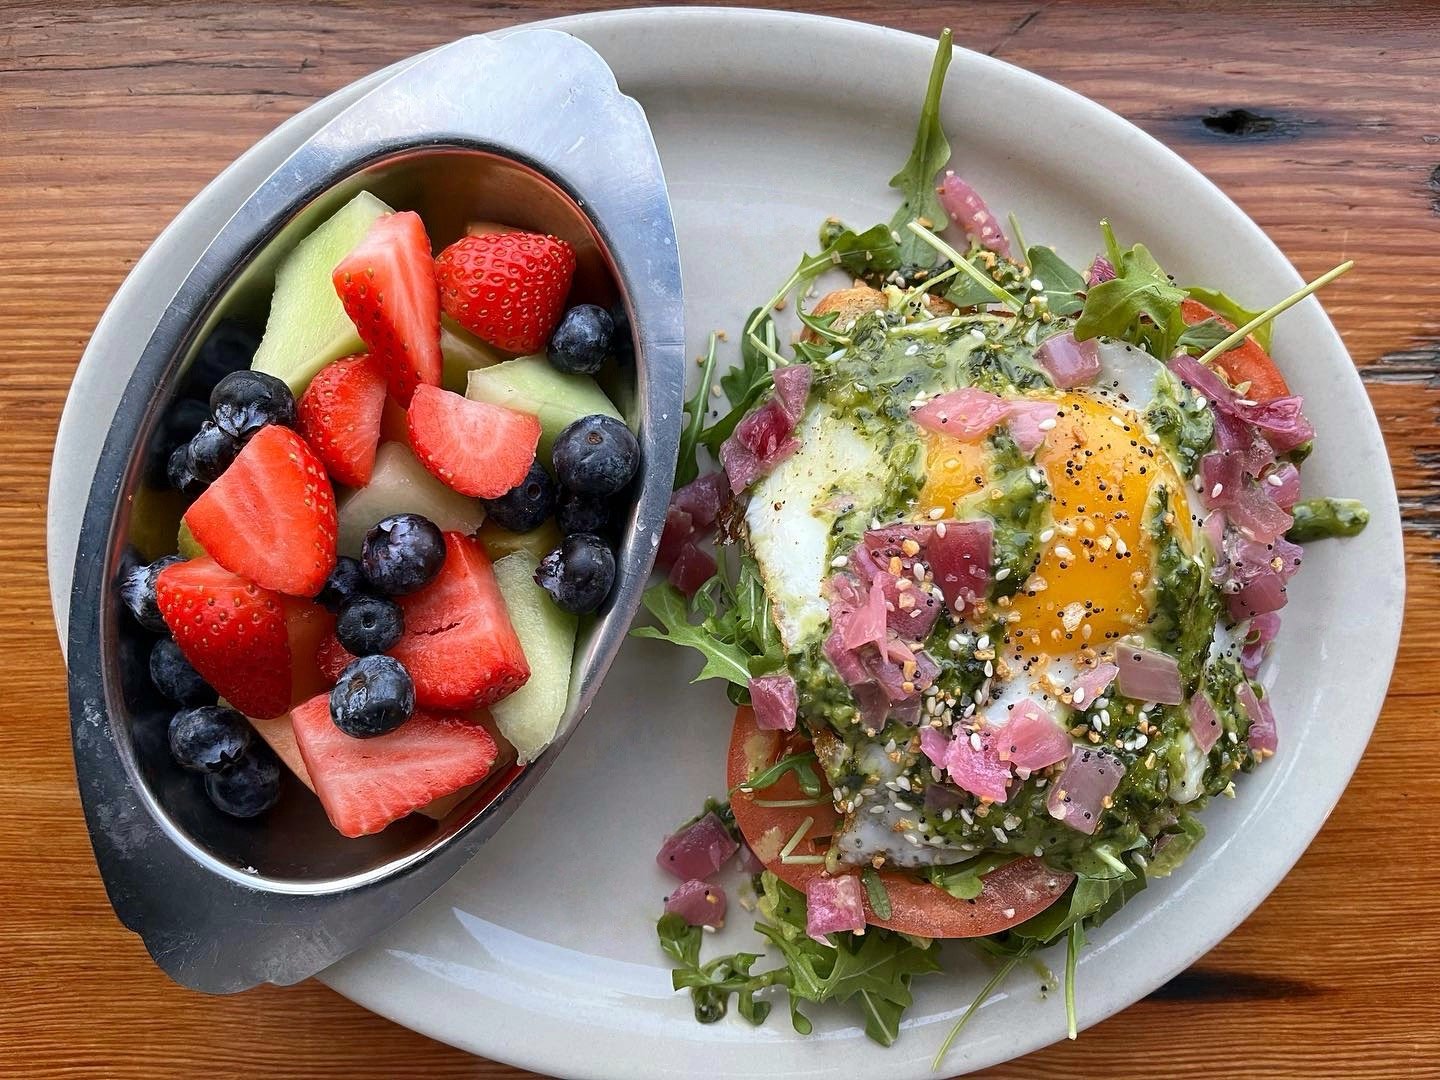 Avocado Toast is on special for breakfast! 🥑 Toasted wheat bread topped with avocado, arugula, tomato, fried egg, basil vinaigrette, pickled red onion &amp; everything bagel seasoning, served with fresh fruit.